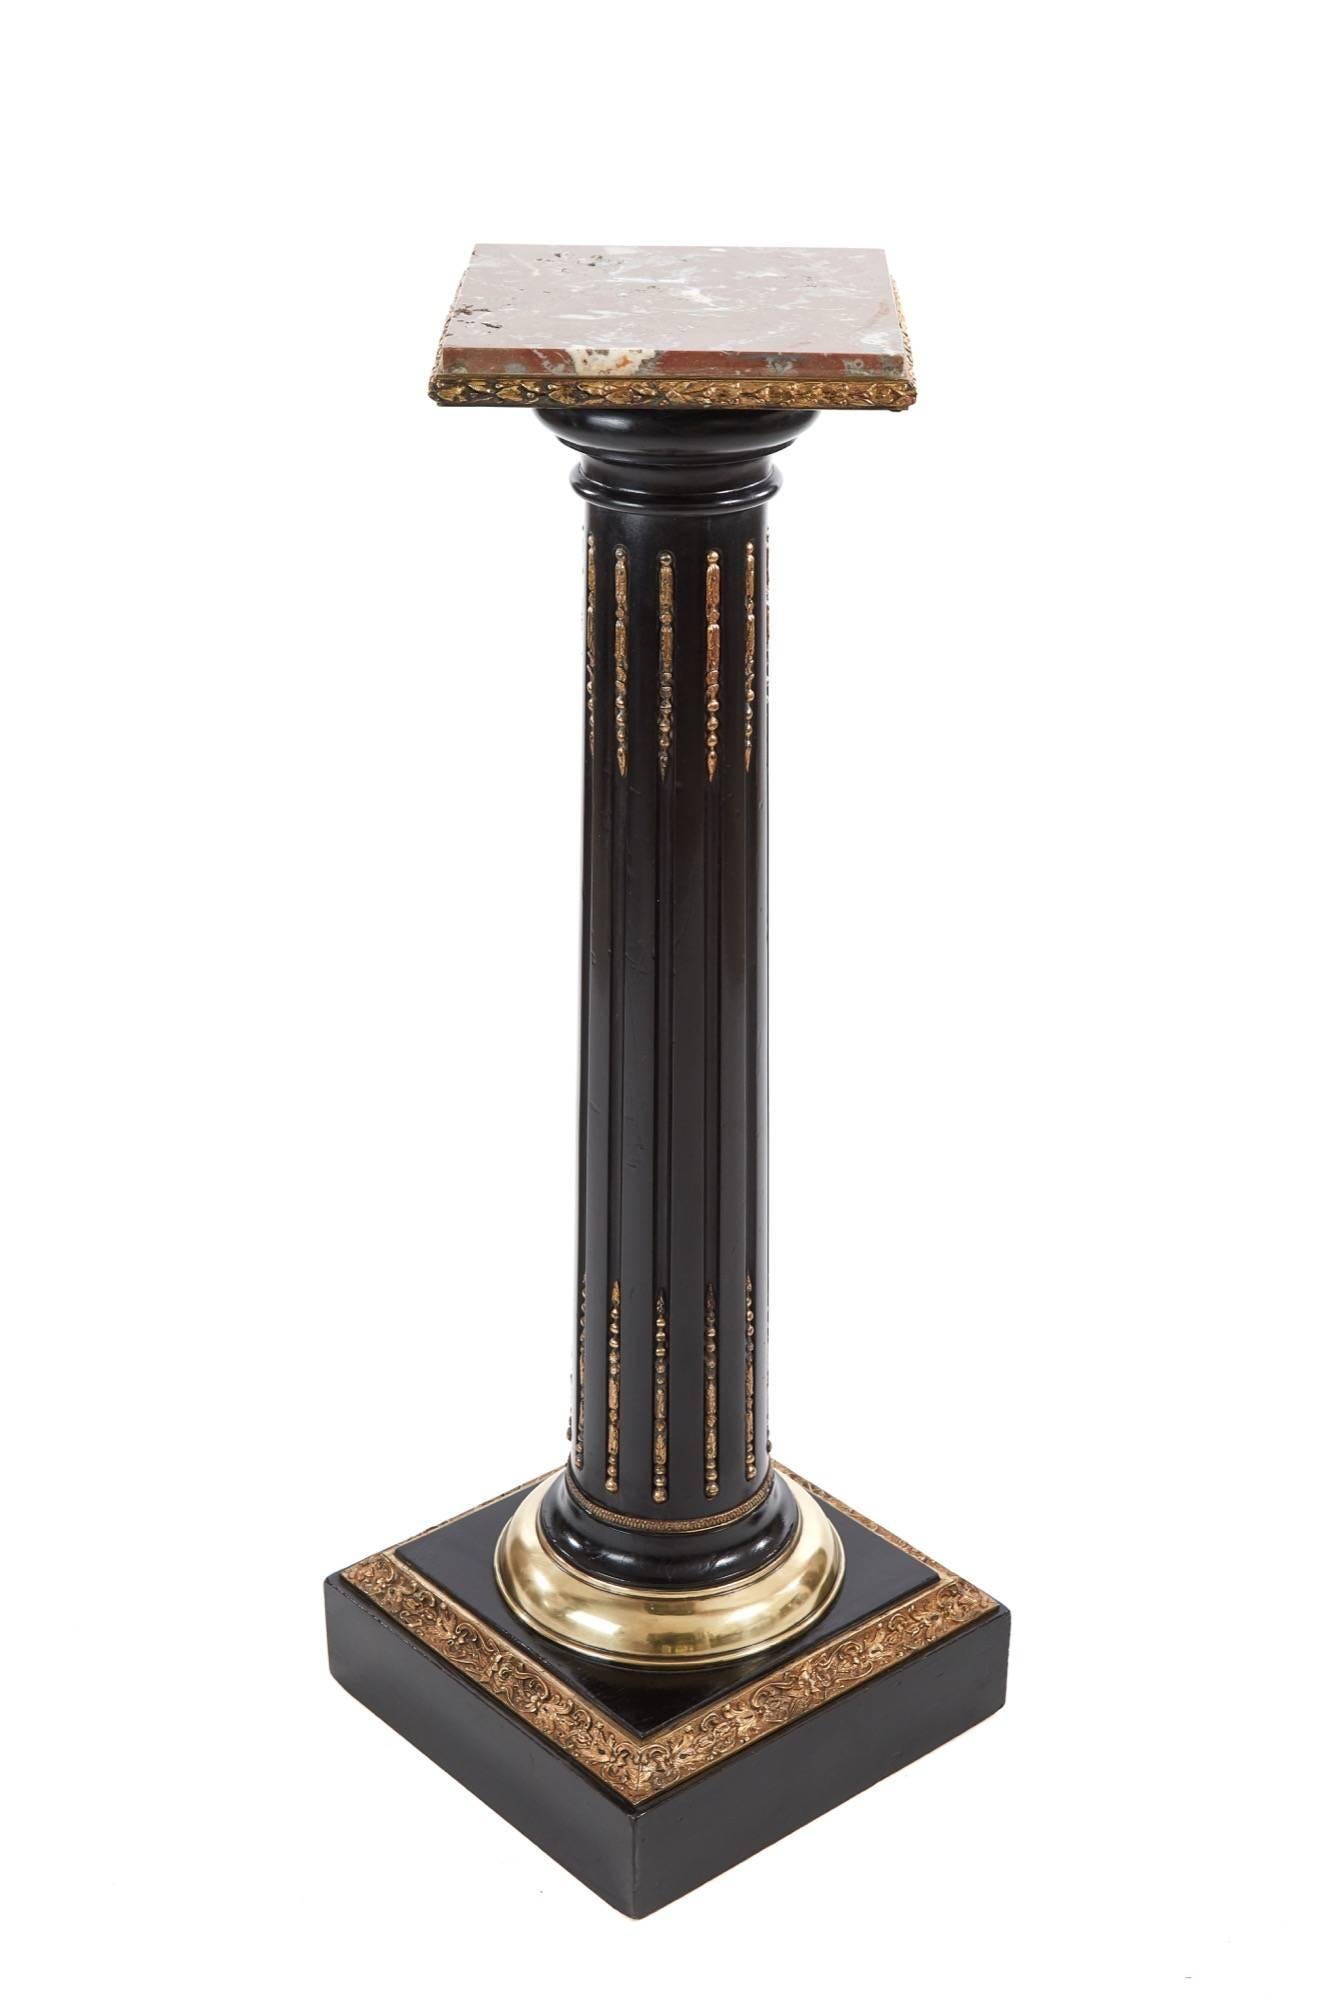 French ebonized and ormolu-mounted pedestal column, with a ormolu-mounted swivel marble top, reeded ebonised column with brass mounts and brass collar, standing on a ormolu-mounted plinth base
Lovely color and condition.